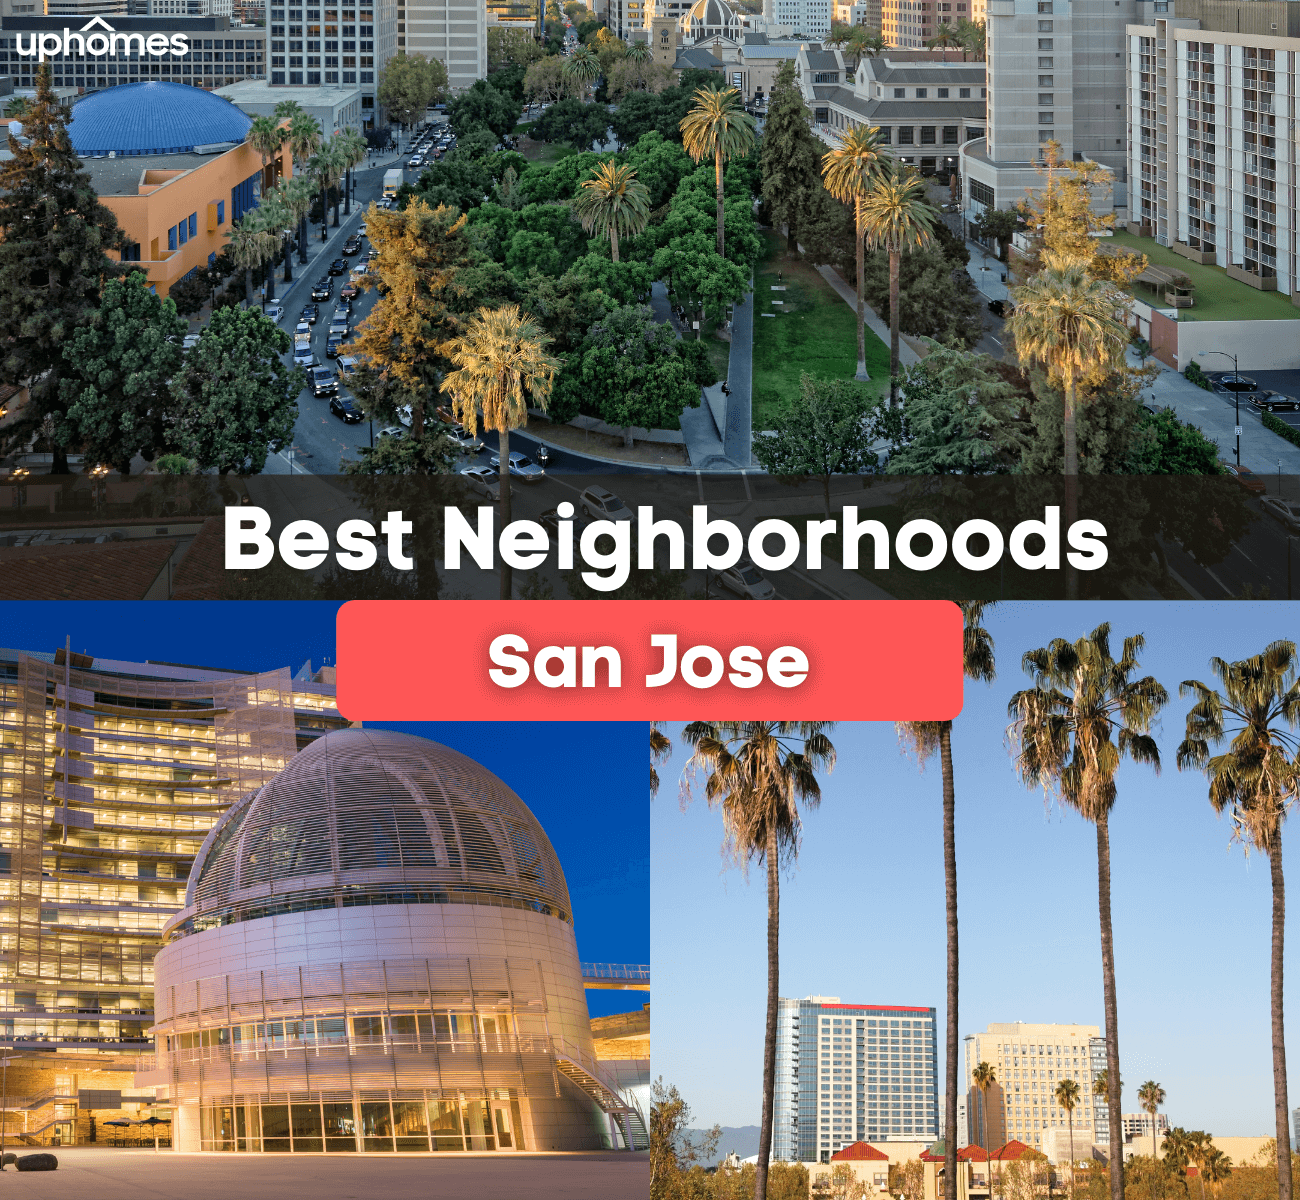 Best Neighborhoods in San Jose, CA - What are the best places to live in San Jose California?